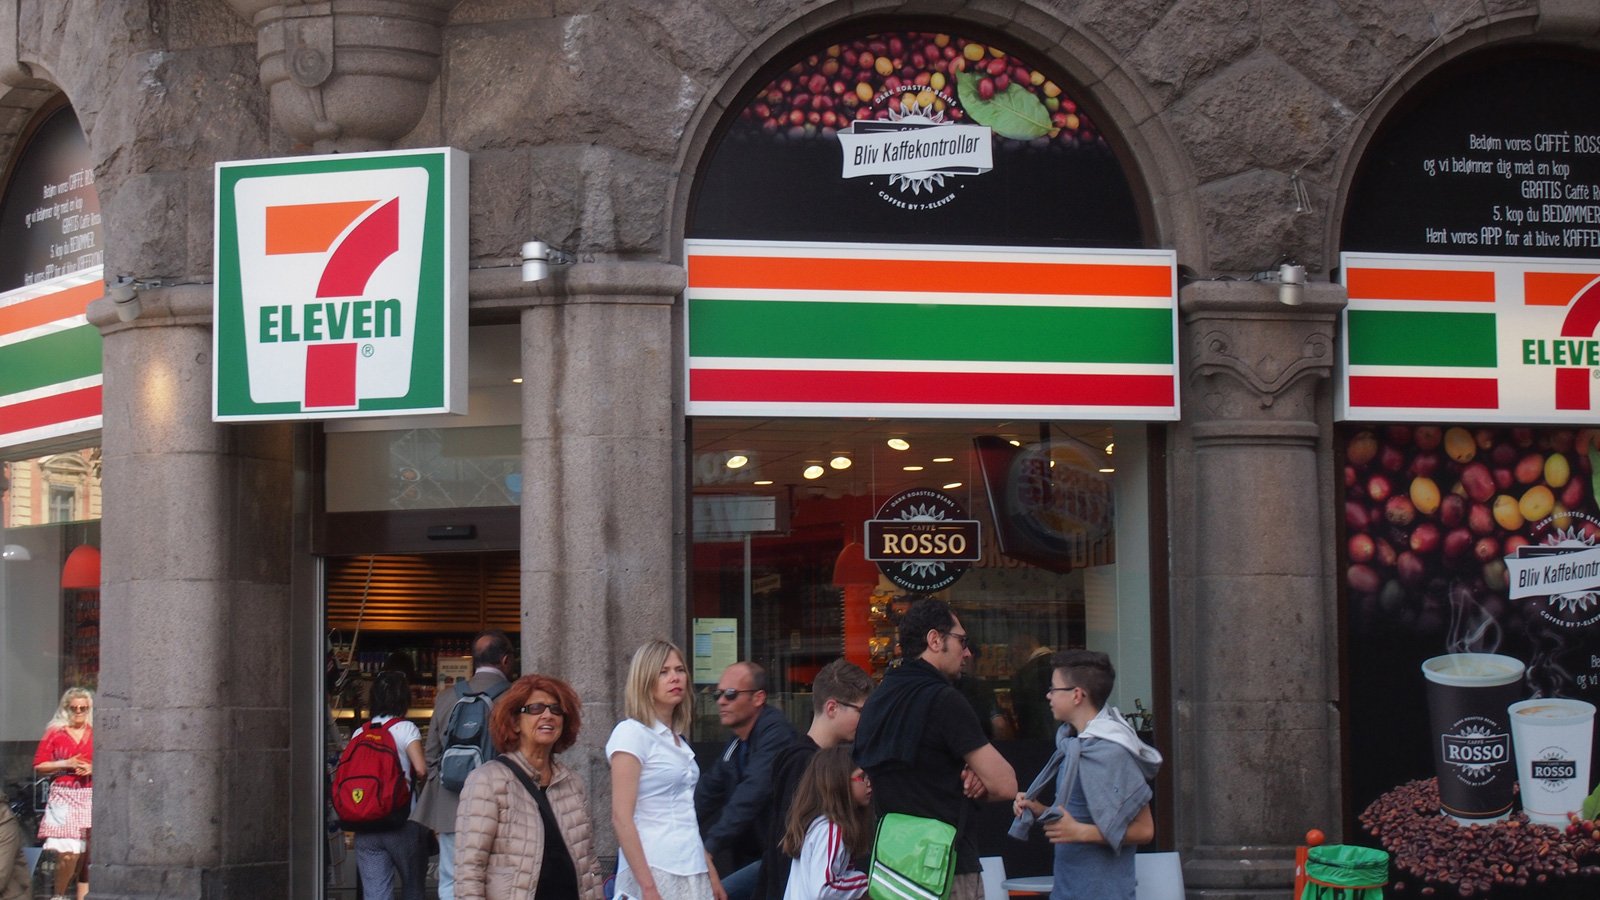 Street view of a 7-Eleven in Denmark